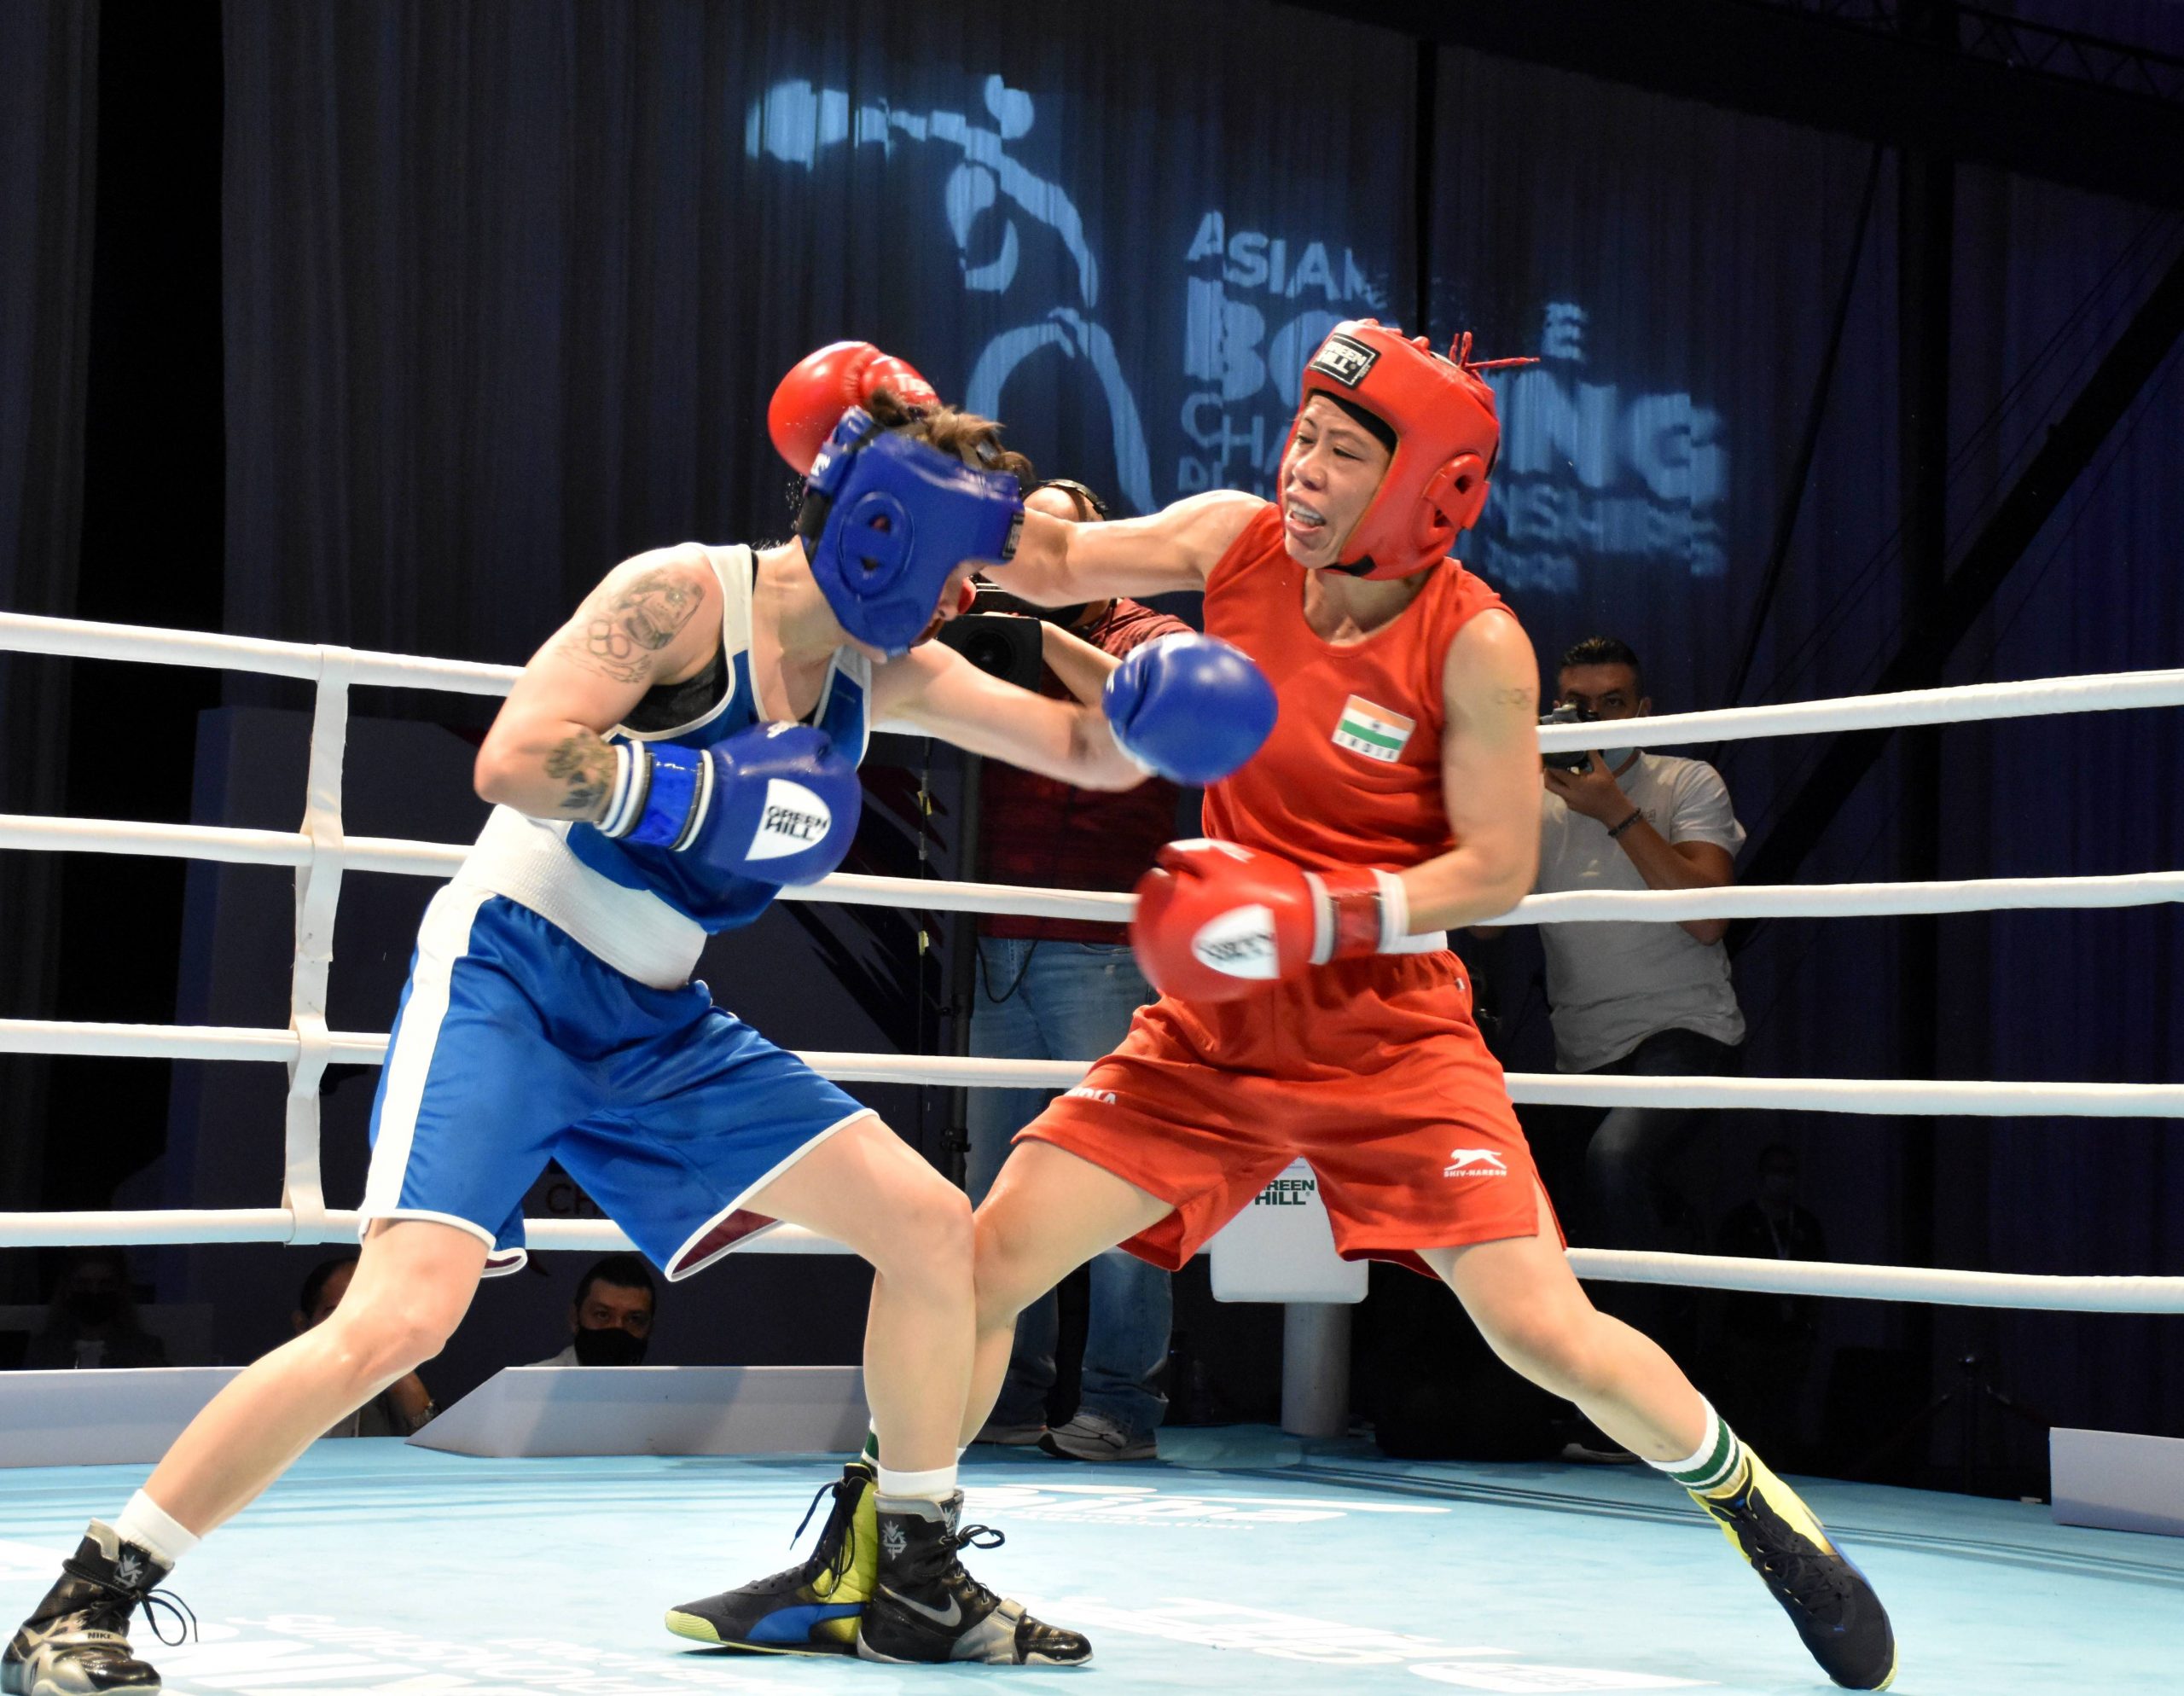 Mary Kom, Lalbuatsaihi sign off with silver medals at Asian Boxing Championships